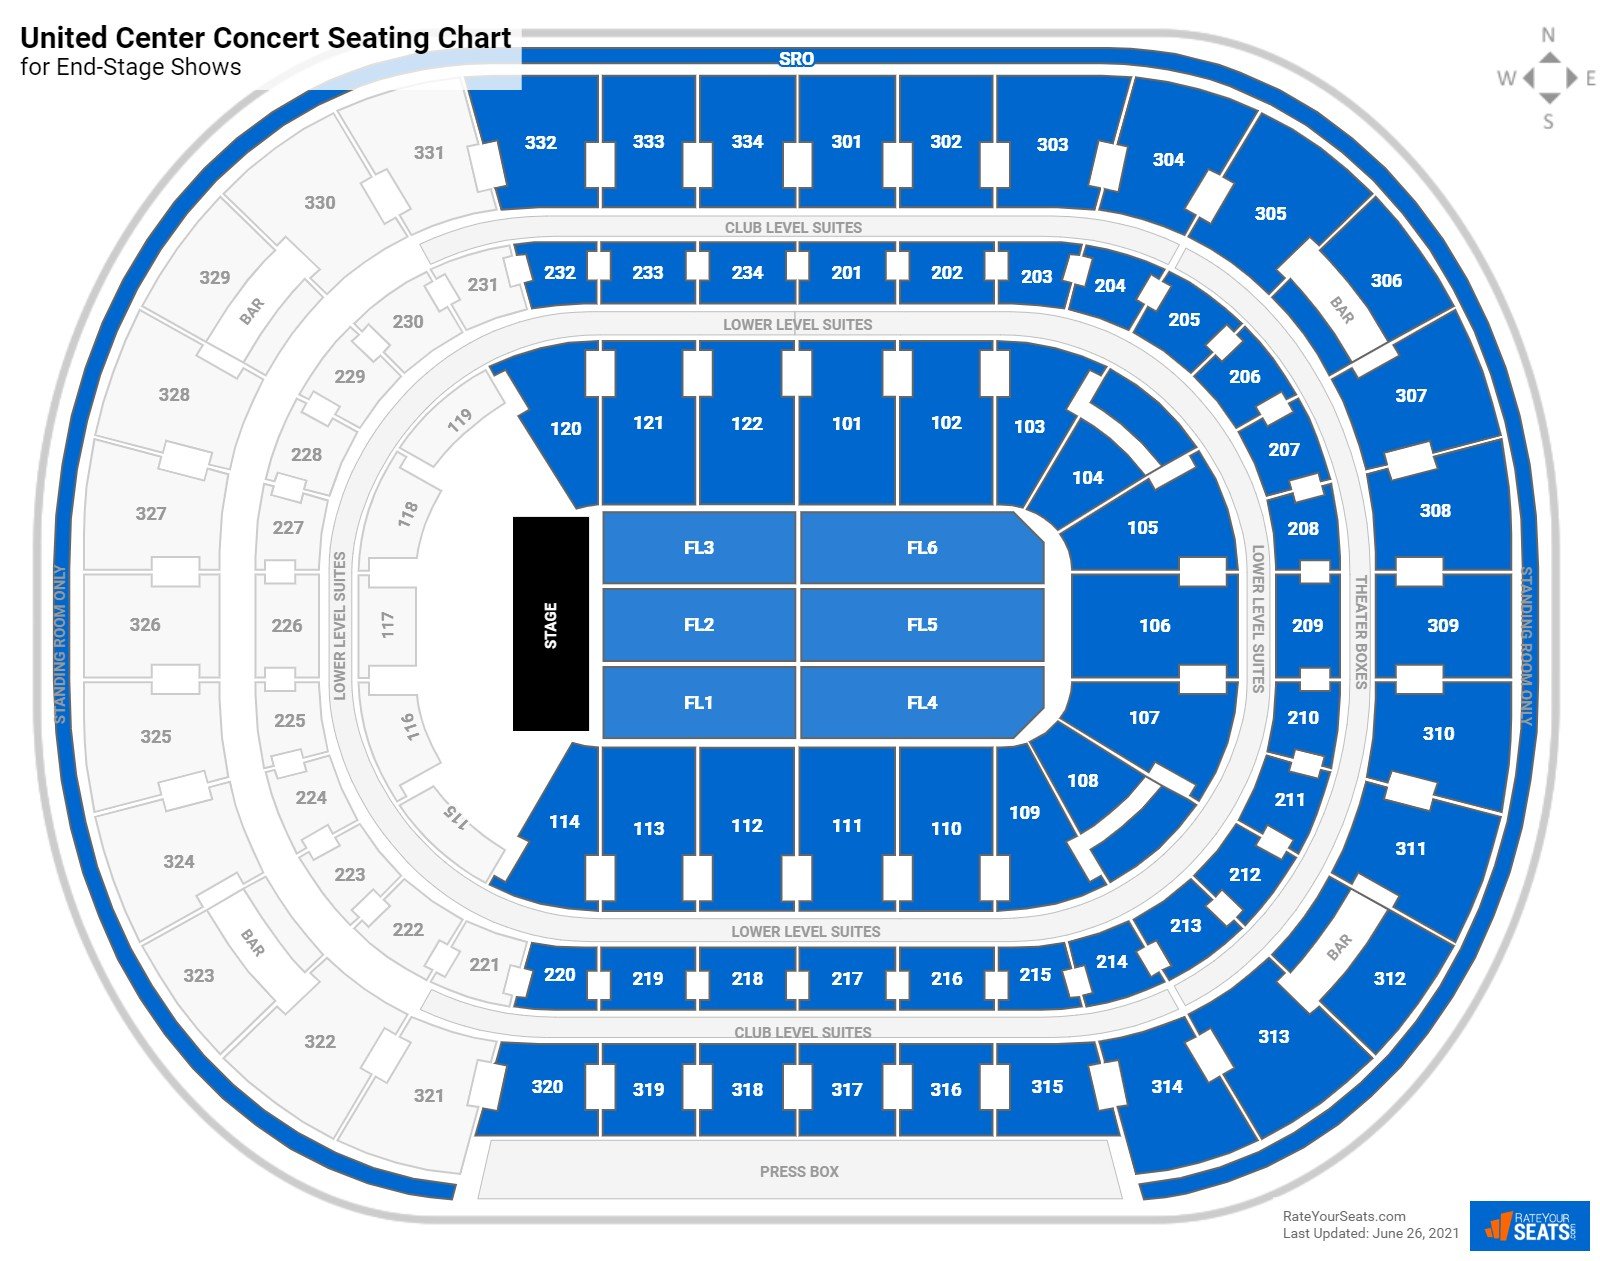 Seating Charts for United Center.